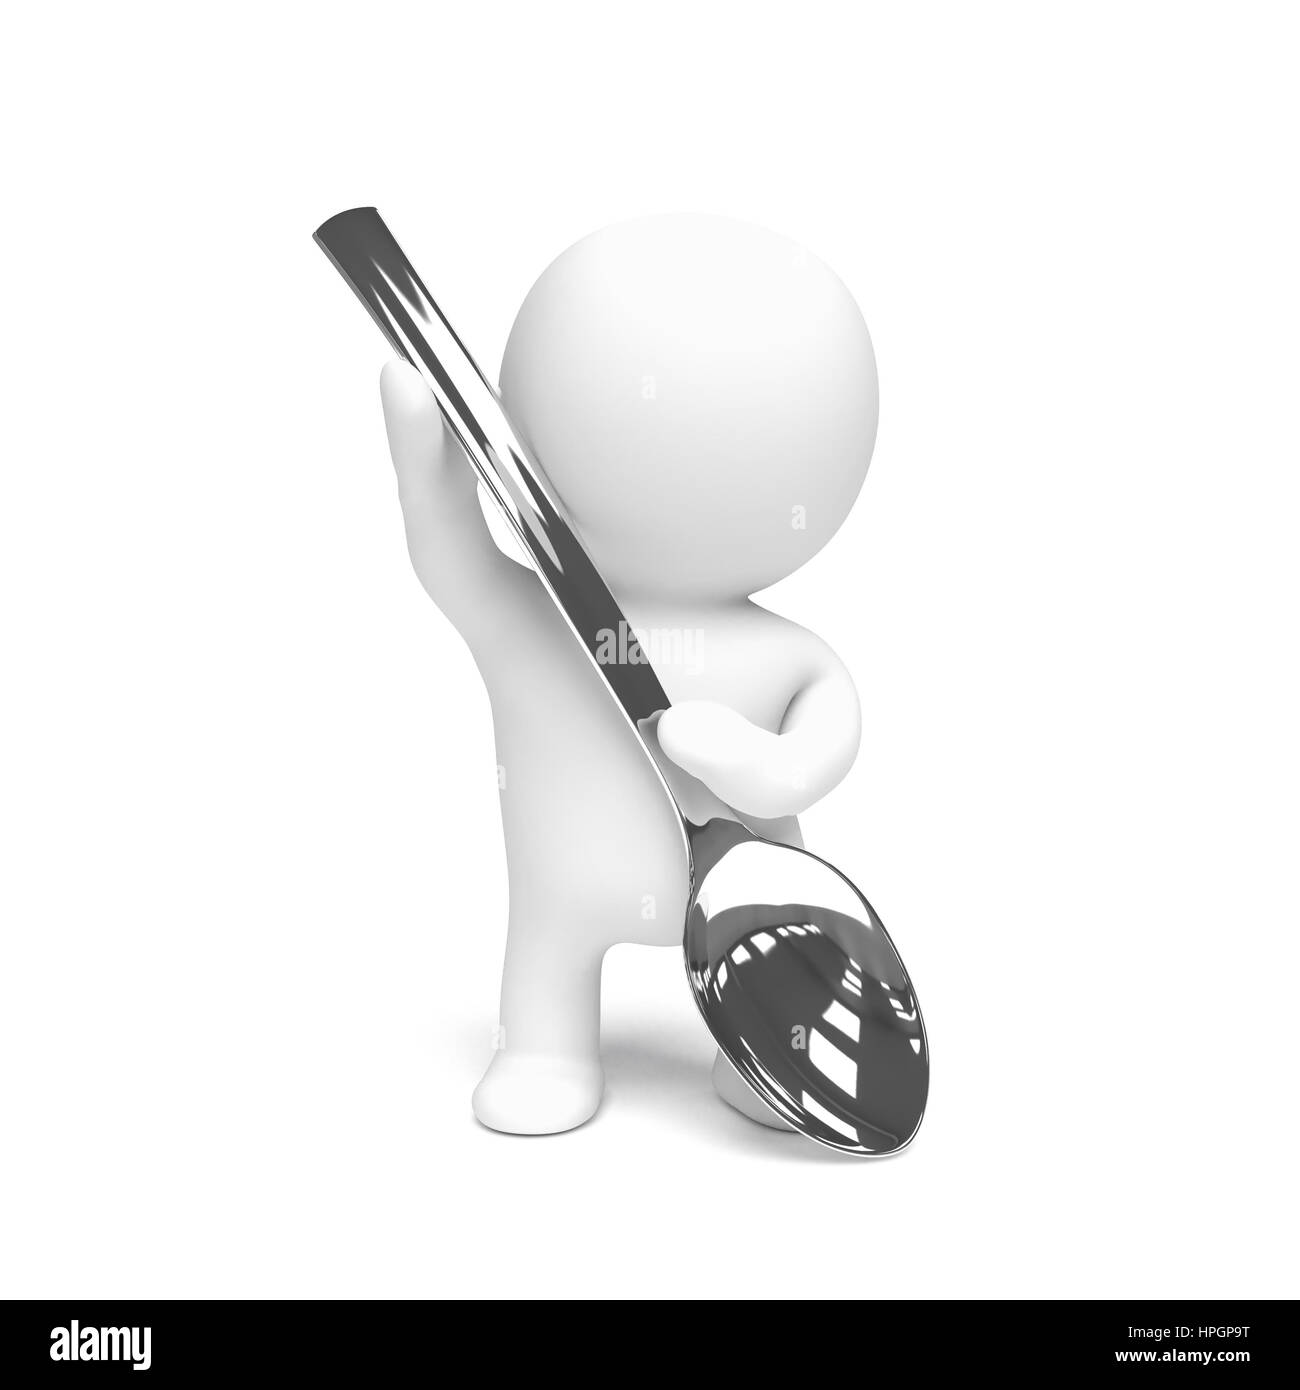 cute white 3d person holding a big metal spoon (3D illustration isolated on a white background) Stock Photo